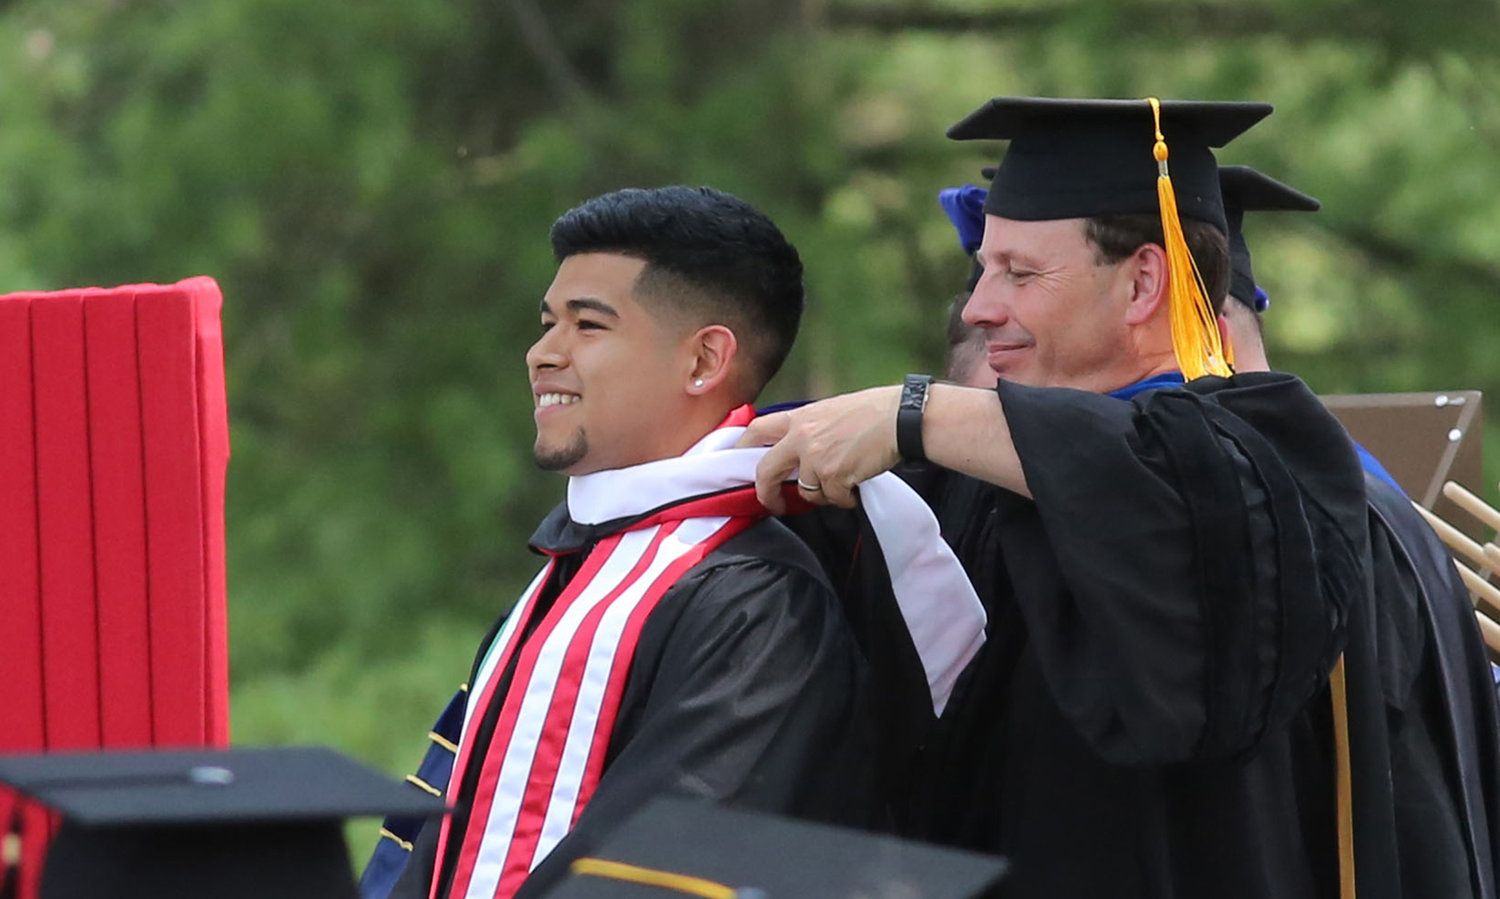 Dean of the College Scott E. Feller hoods a graduate during Wabash College's 2018 Commencement in Crawfordsville, Indiana. Feller was elected the 17th President of Wabash College on May 16 and begins his tenure on July 1, 2020.